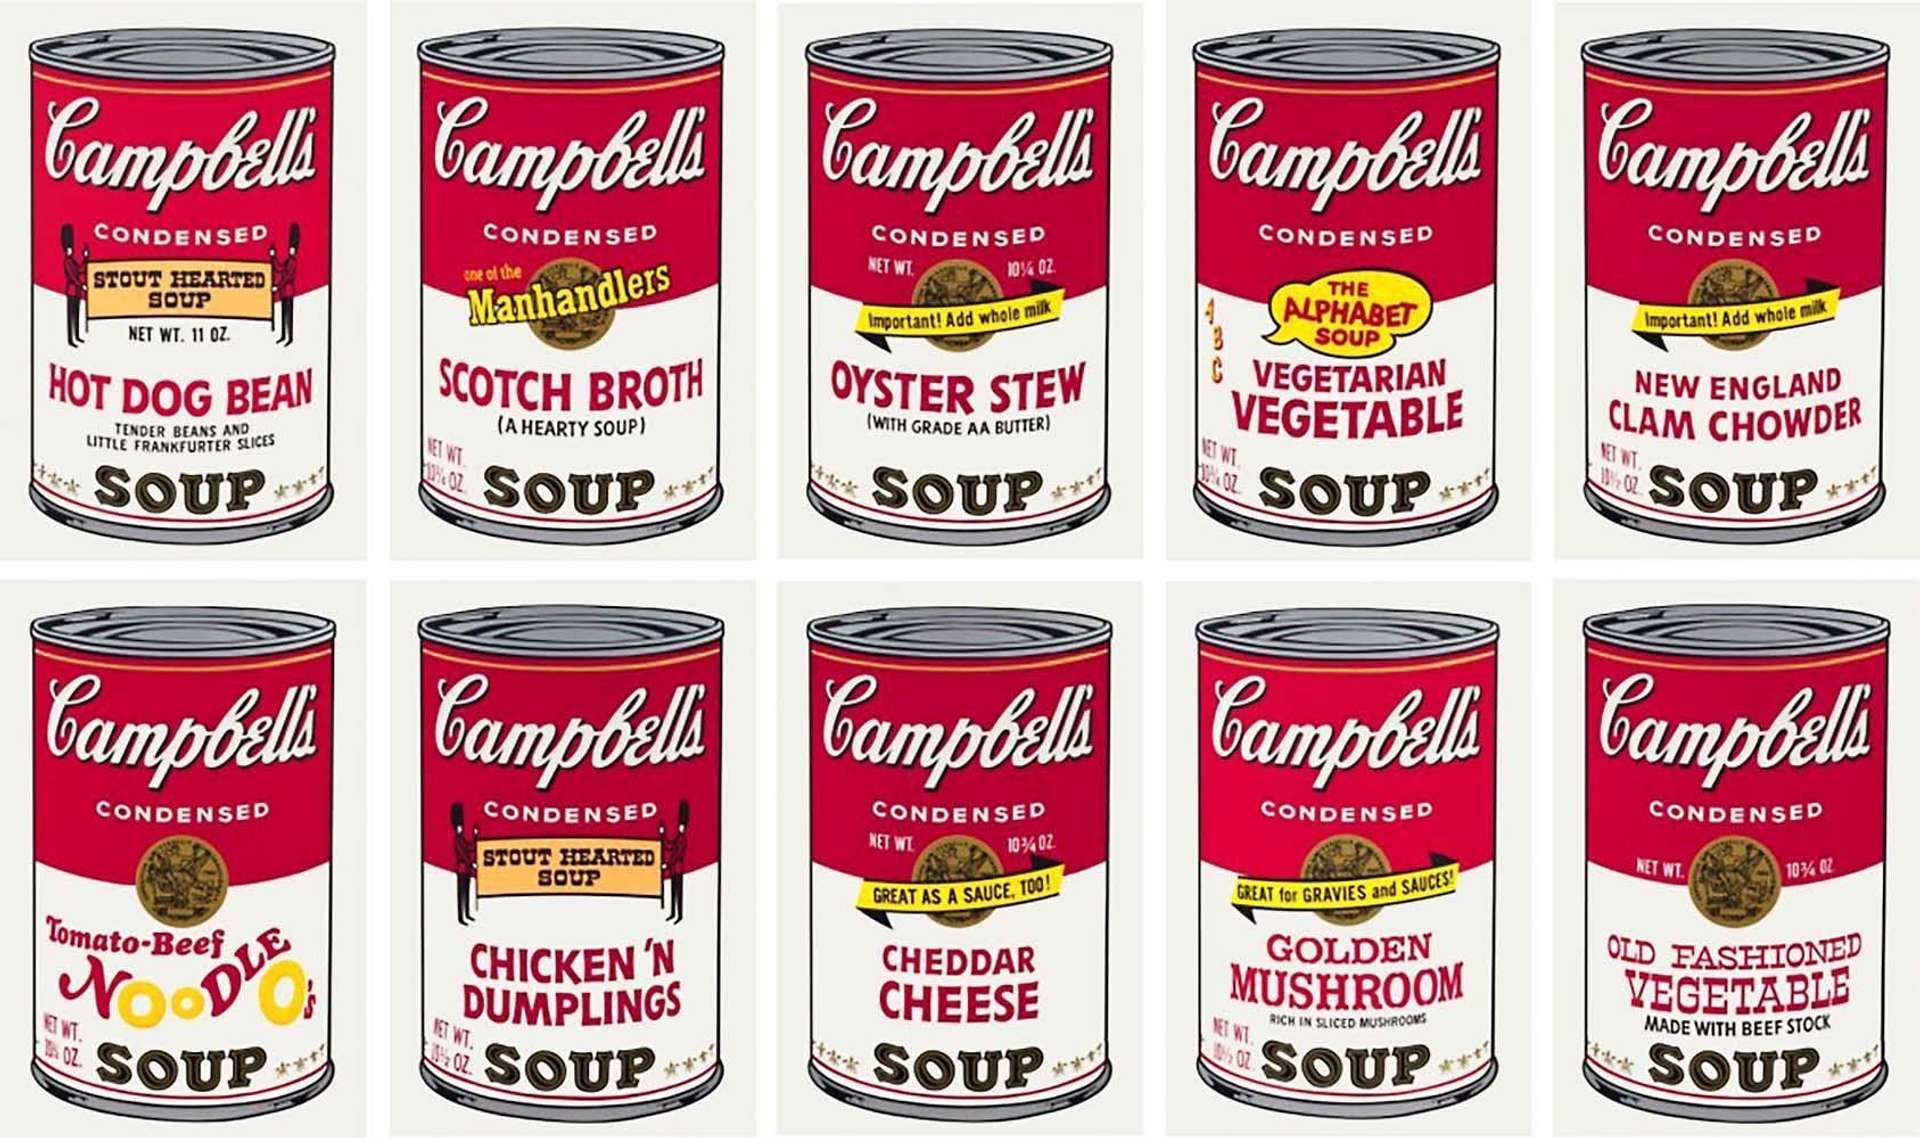 Campbells Soup II Set by Andy Warhol